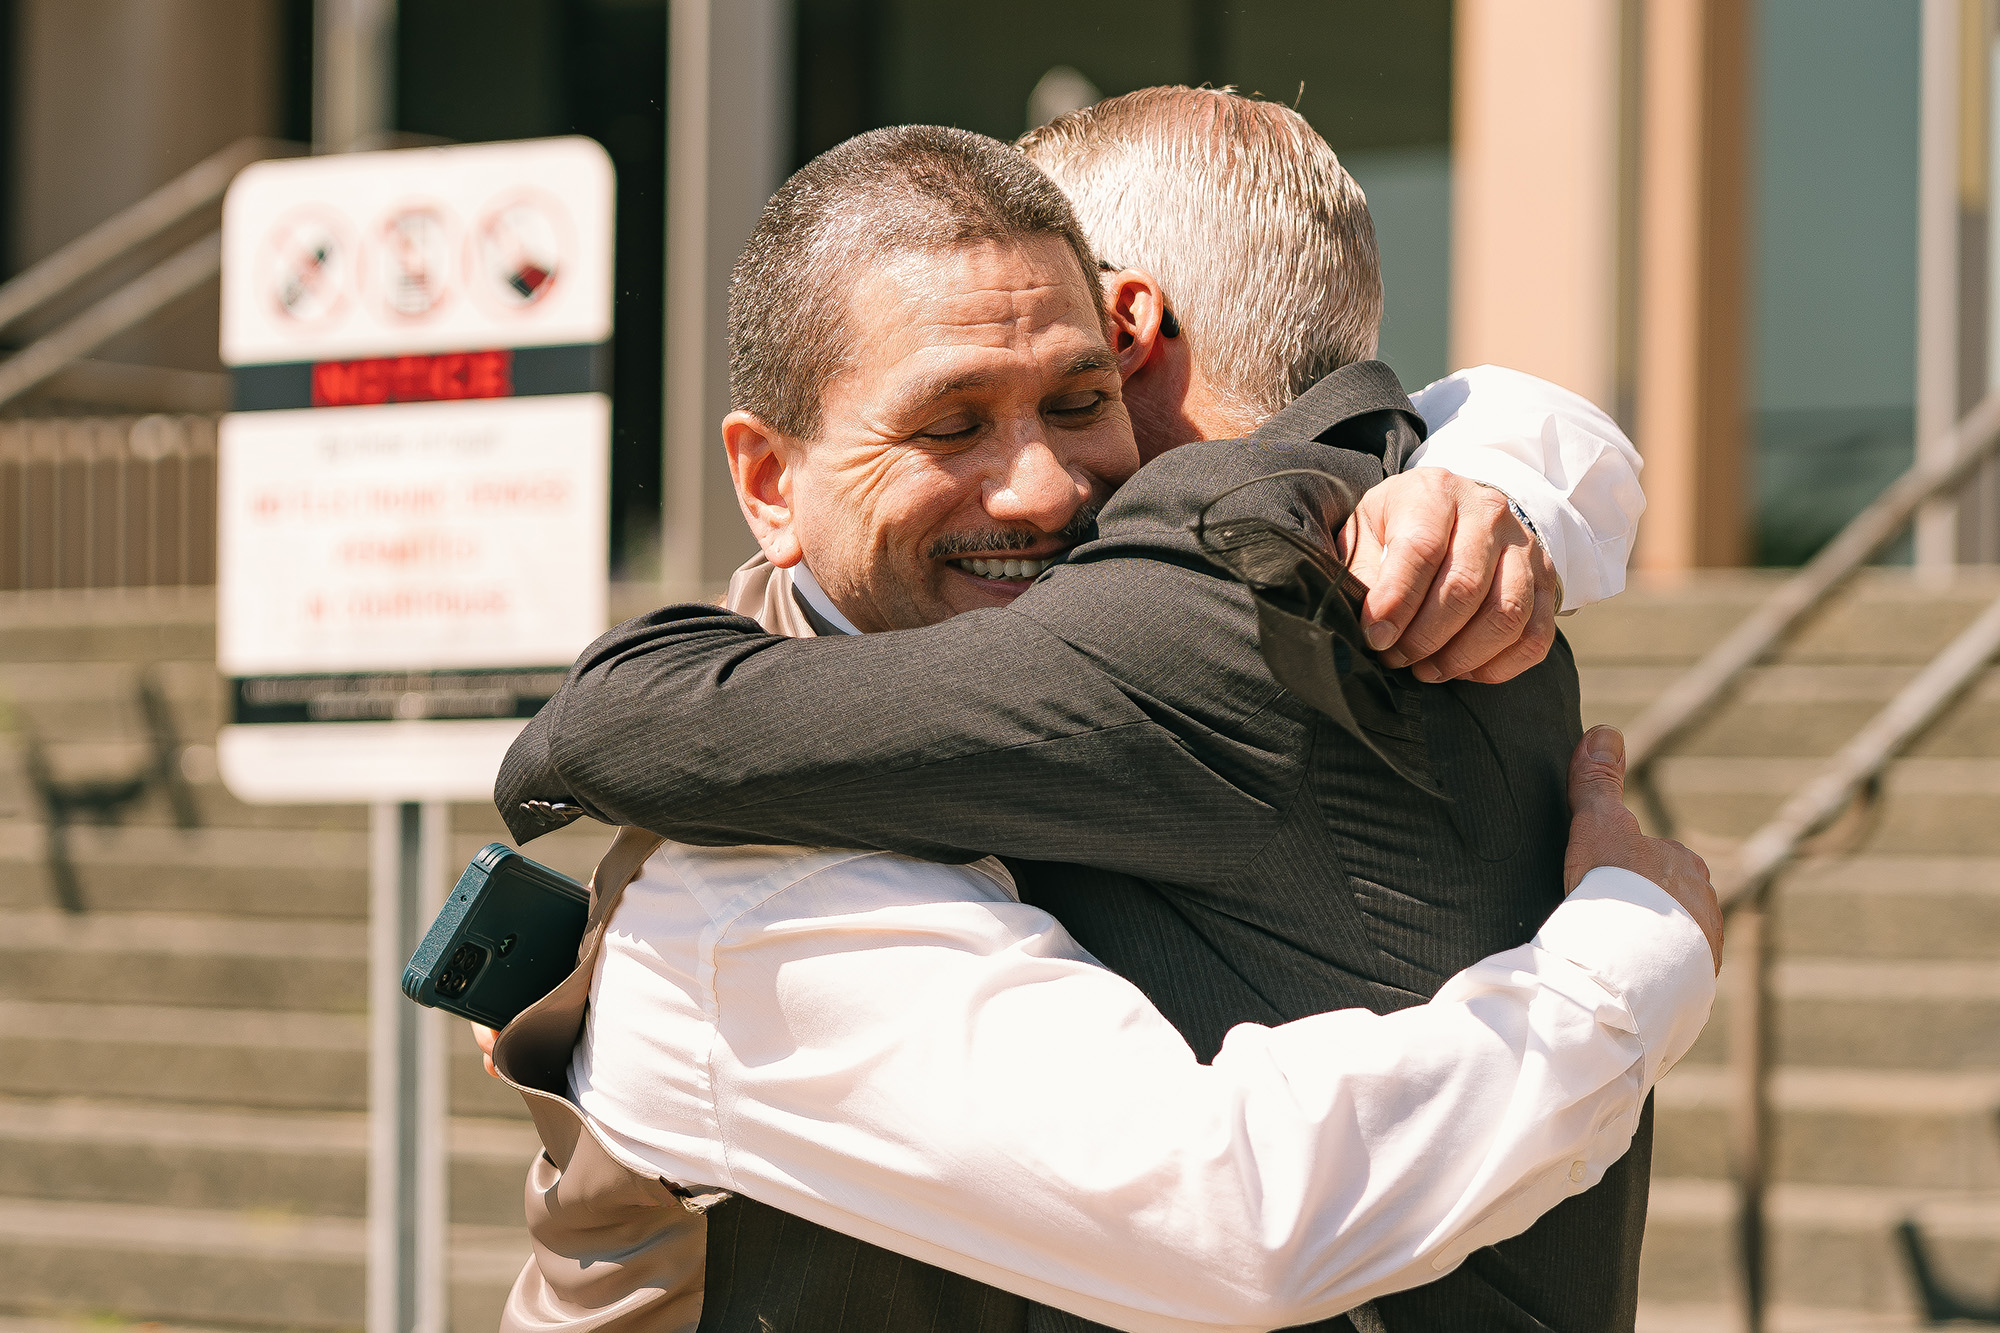 John Galvan hugs a member of his legal team after his exoneration on July 22, 2022. (Image: Ray Abercrombie/Innocence Project)